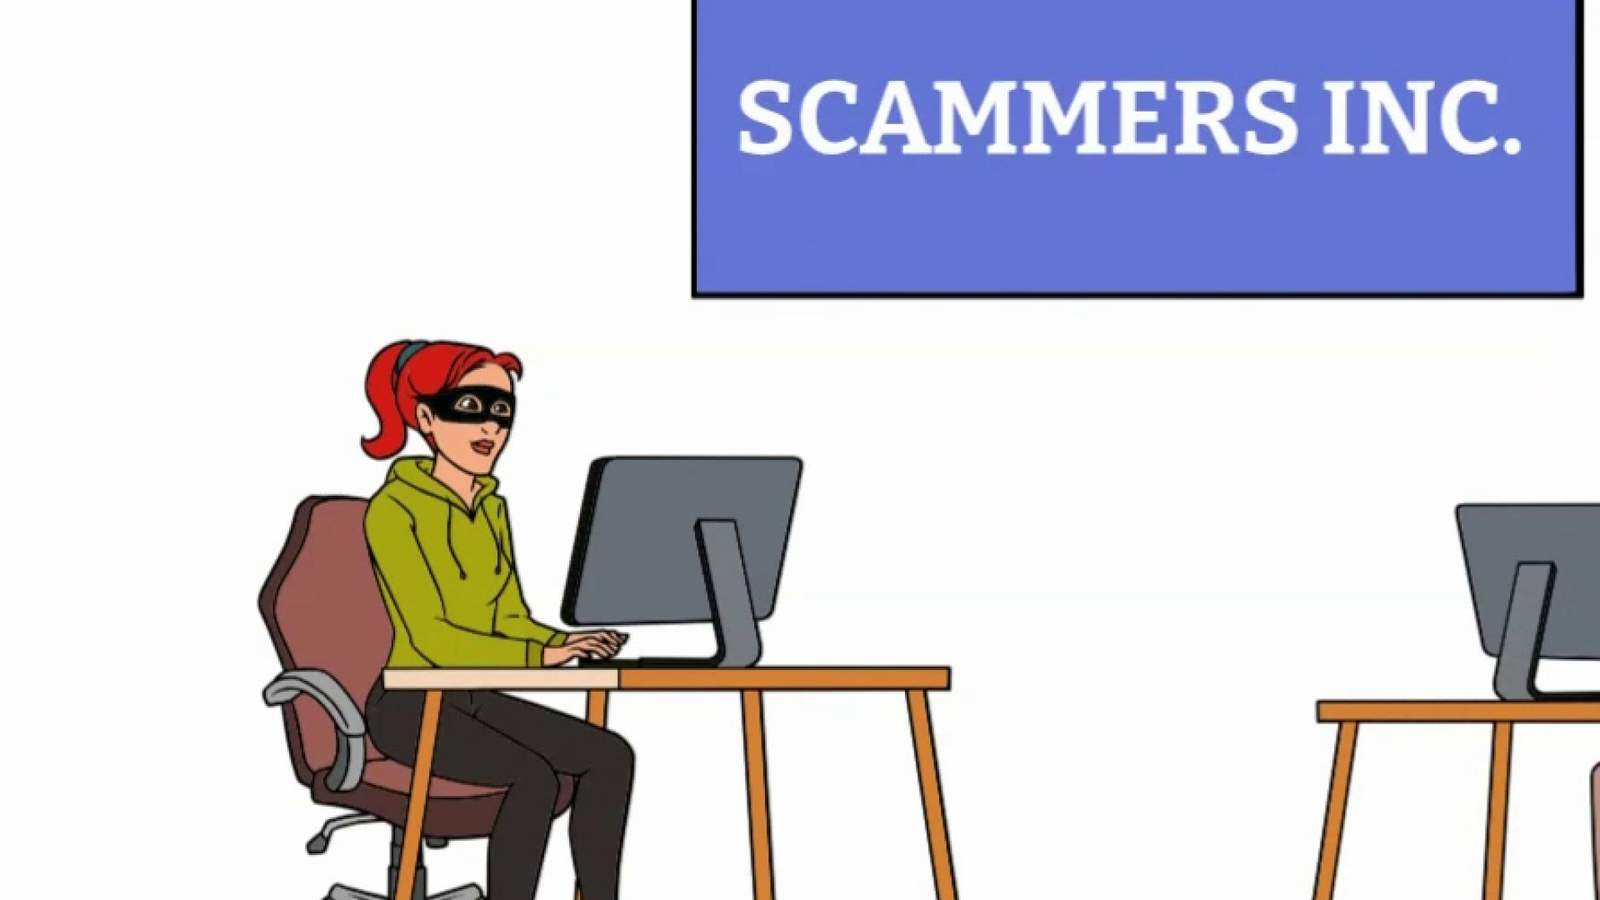 Key scam indicators to look out for to avoid becoming a victim